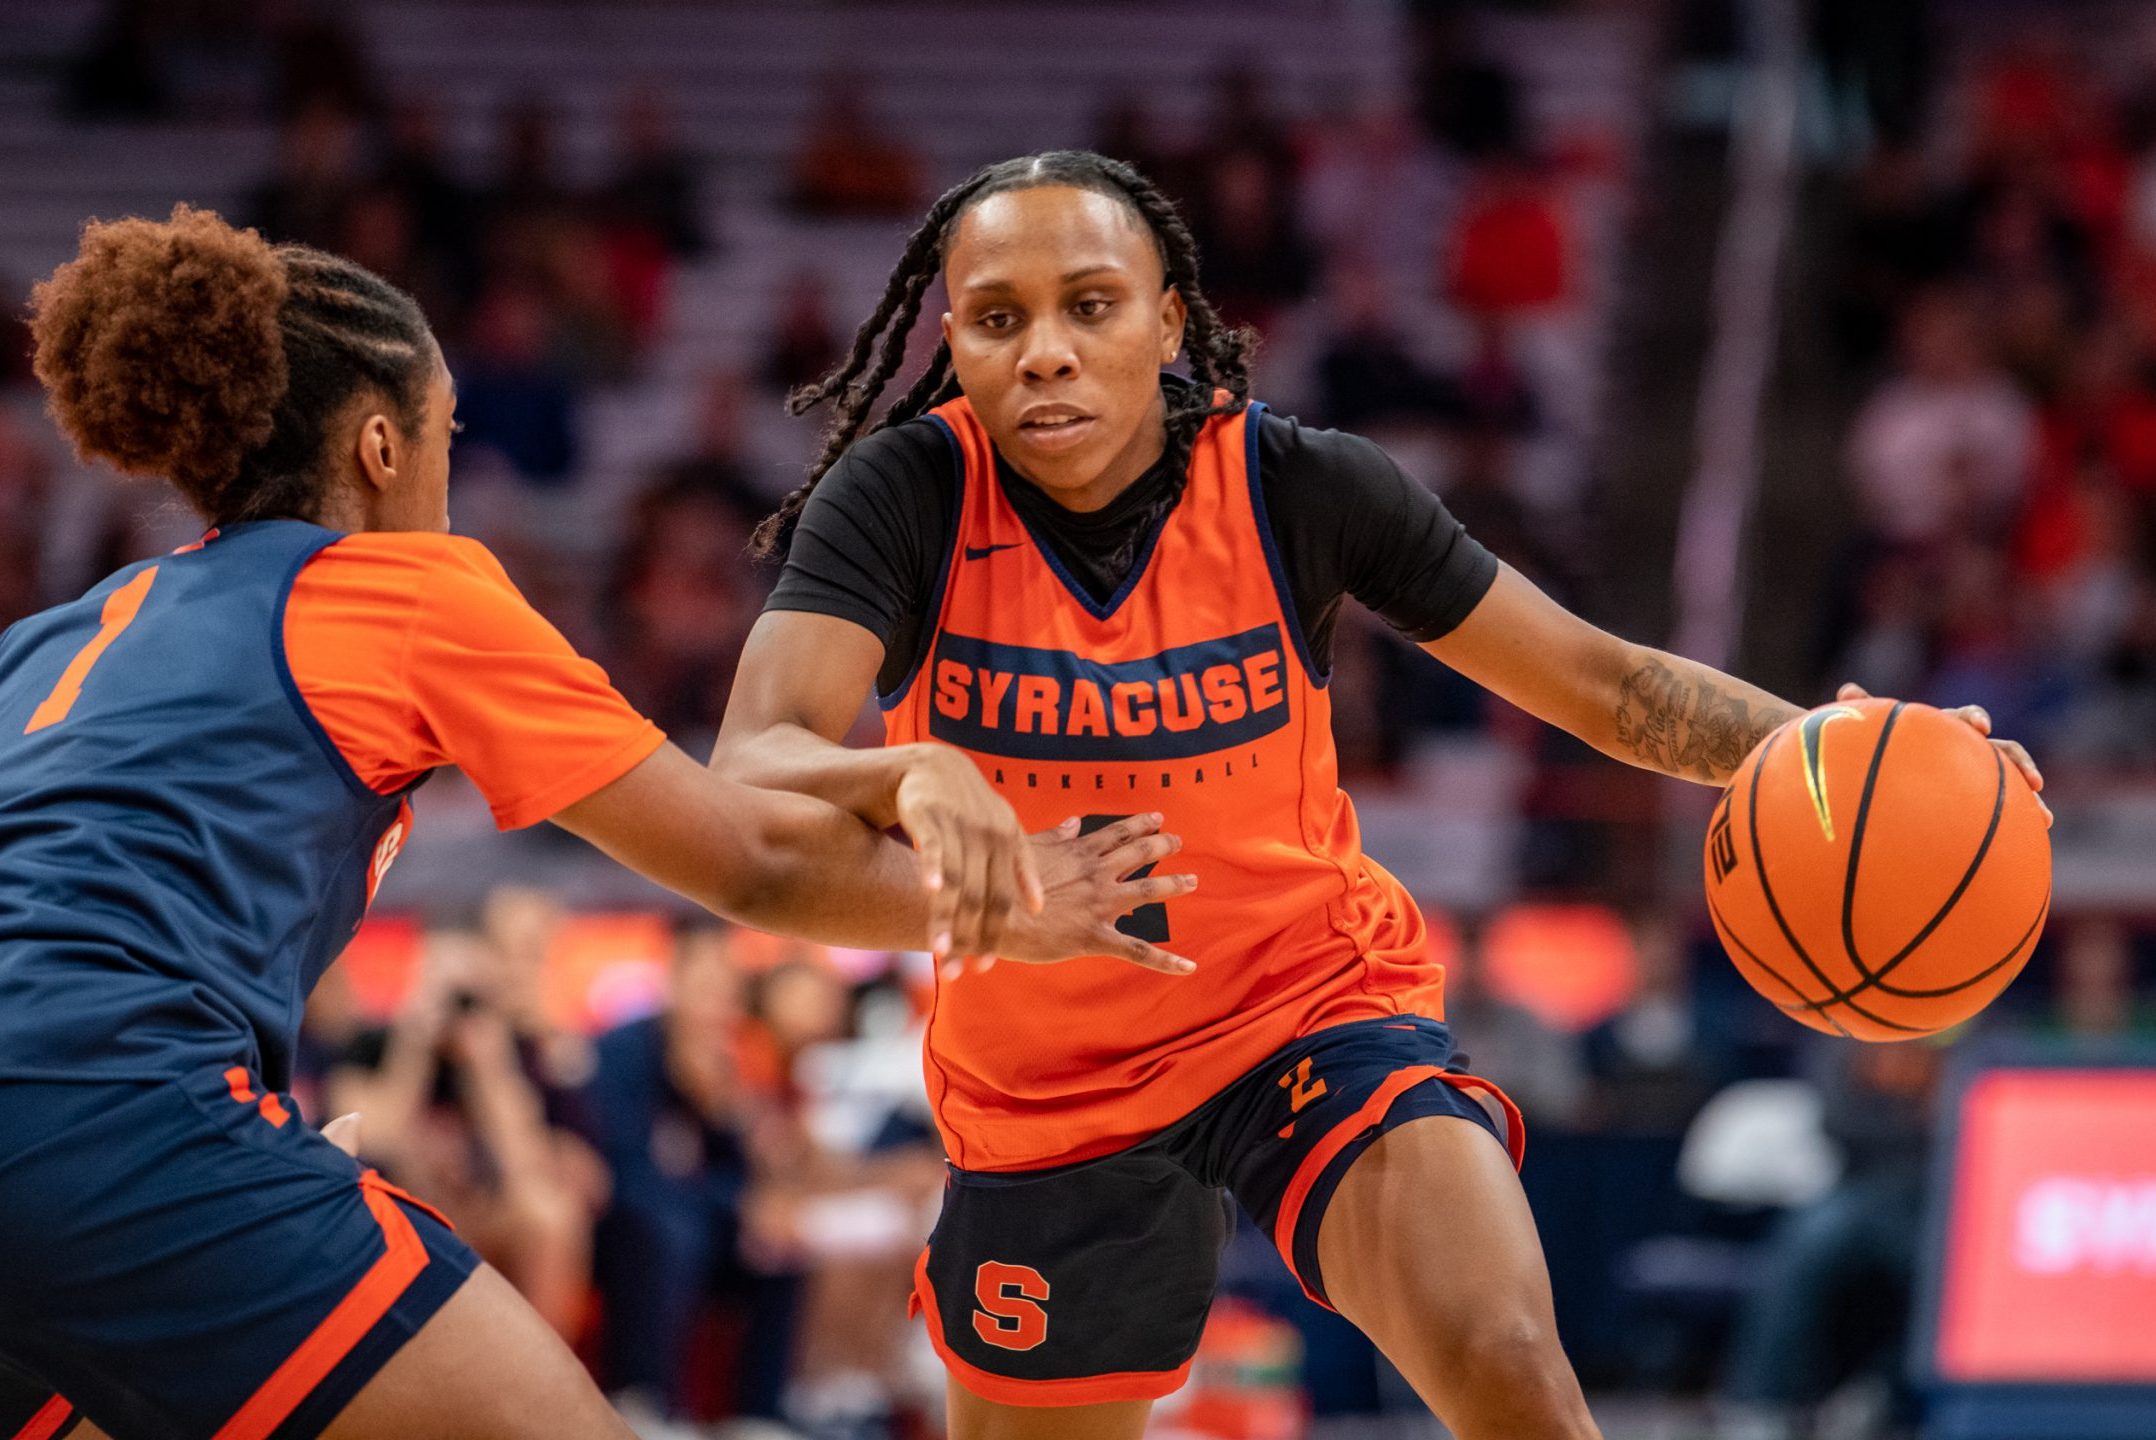 Senior guard, Dyaisha Fair, pushes past her teammate Kennedi Perkins during the women's basketball scrimmage, at the Orange Tip Off fan event. Photo by Ryan Brady. 10/14/22